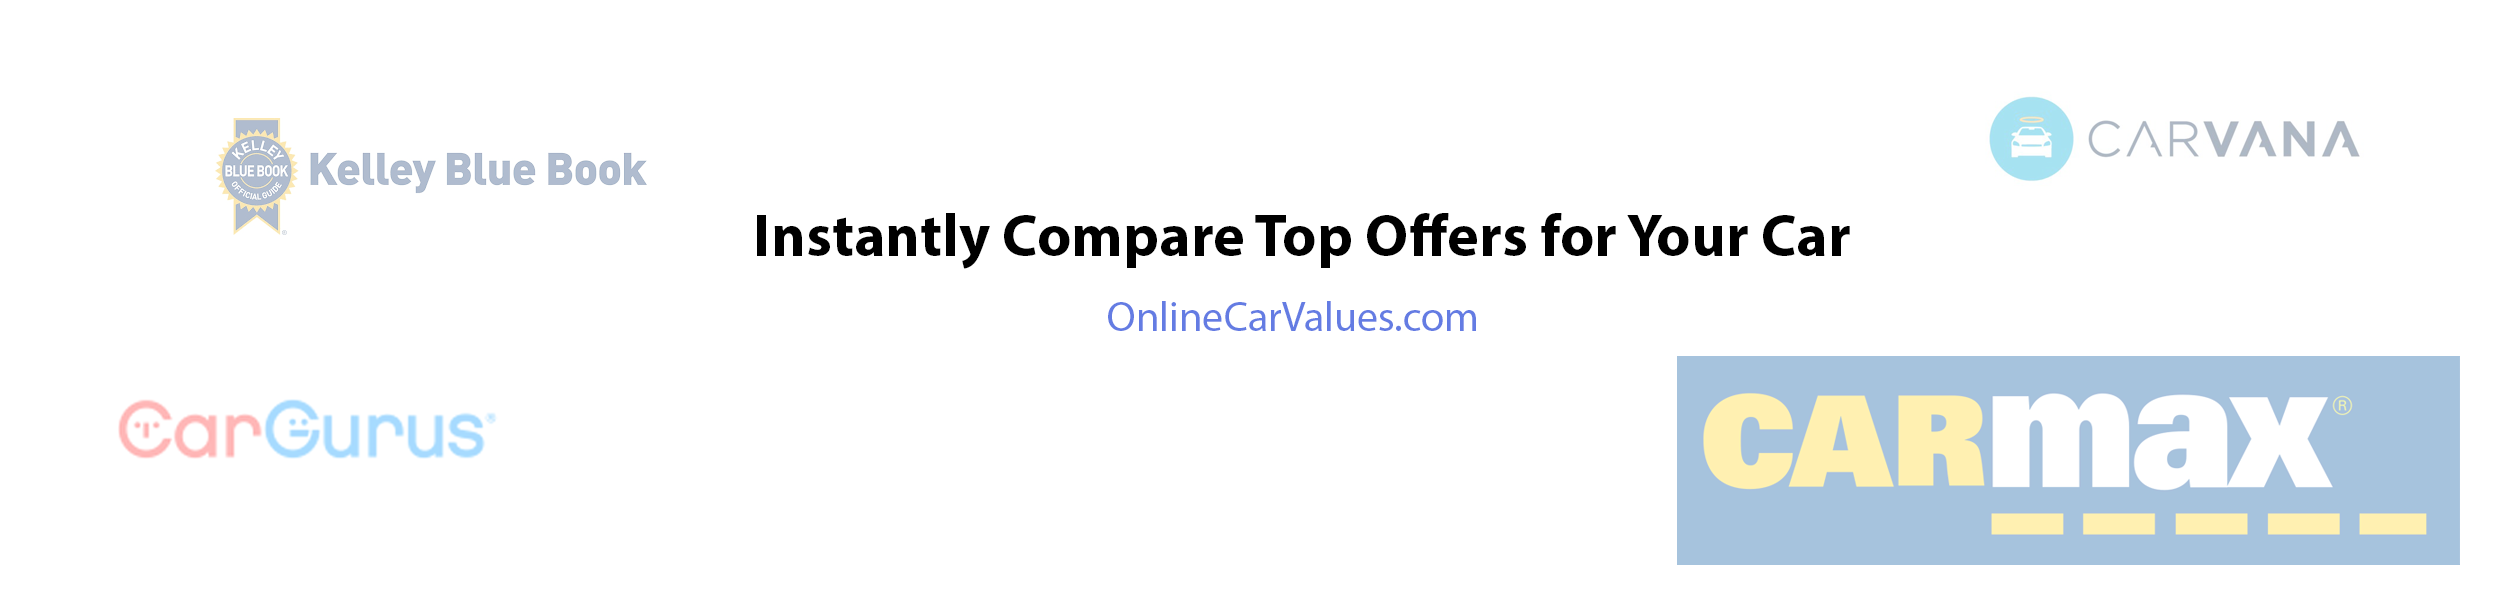 Discover Your Vehicle's Value at OnlineCarValues.com